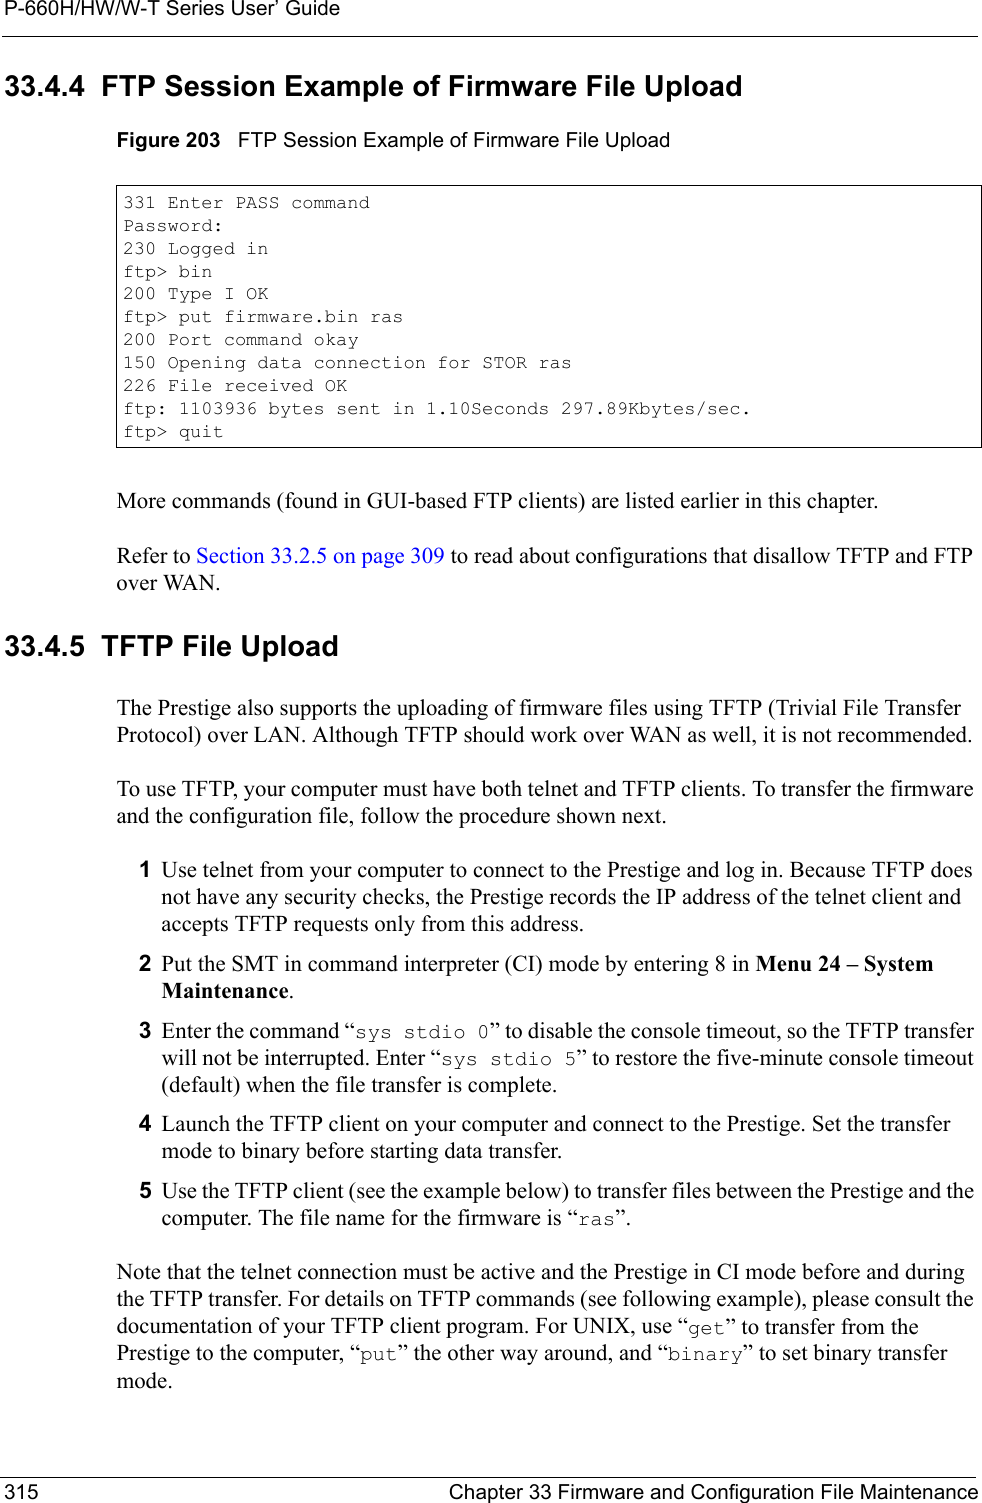 P-660H/HW/W-T Series User’ Guide315 Chapter 33 Firmware and Configuration File Maintenance33.4.4  FTP Session Example of Firmware File UploadFigure 203   FTP Session Example of Firmware File UploadMore commands (found in GUI-based FTP clients) are listed earlier in this chapter.Refer to Section 33.2.5 on page 309 to read about configurations that disallow TFTP and FTP over WAN.33.4.5  TFTP File UploadThe Prestige also supports the uploading of firmware files using TFTP (Trivial File Transfer Protocol) over LAN. Although TFTP should work over WAN as well, it is not recommended.To use TFTP, your computer must have both telnet and TFTP clients. To transfer the firmware and the configuration file, follow the procedure shown next.1Use telnet from your computer to connect to the Prestige and log in. Because TFTP does not have any security checks, the Prestige records the IP address of the telnet client and accepts TFTP requests only from this address.2Put the SMT in command interpreter (CI) mode by entering 8 in Menu 24 – System Maintenance.3Enter the command “sys stdio 0” to disable the console timeout, so the TFTP transfer will not be interrupted. Enter “sys stdio 5” to restore the five-minute console timeout (default) when the file transfer is complete.4Launch the TFTP client on your computer and connect to the Prestige. Set the transfer mode to binary before starting data transfer.5Use the TFTP client (see the example below) to transfer files between the Prestige and the computer. The file name for the firmware is “ras”.Note that the telnet connection must be active and the Prestige in CI mode before and during the TFTP transfer. For details on TFTP commands (see following example), please consult the documentation of your TFTP client program. For UNIX, use “get” to transfer from the Prestige to the computer, “put” the other way around, and “binary” to set binary transfer mode.331 Enter PASS commandPassword:230 Logged inftp&gt; bin200 Type I OKftp&gt; put firmware.bin ras200 Port command okay150 Opening data connection for STOR ras226 File received OKftp: 1103936 bytes sent in 1.10Seconds 297.89Kbytes/sec.ftp&gt; quit